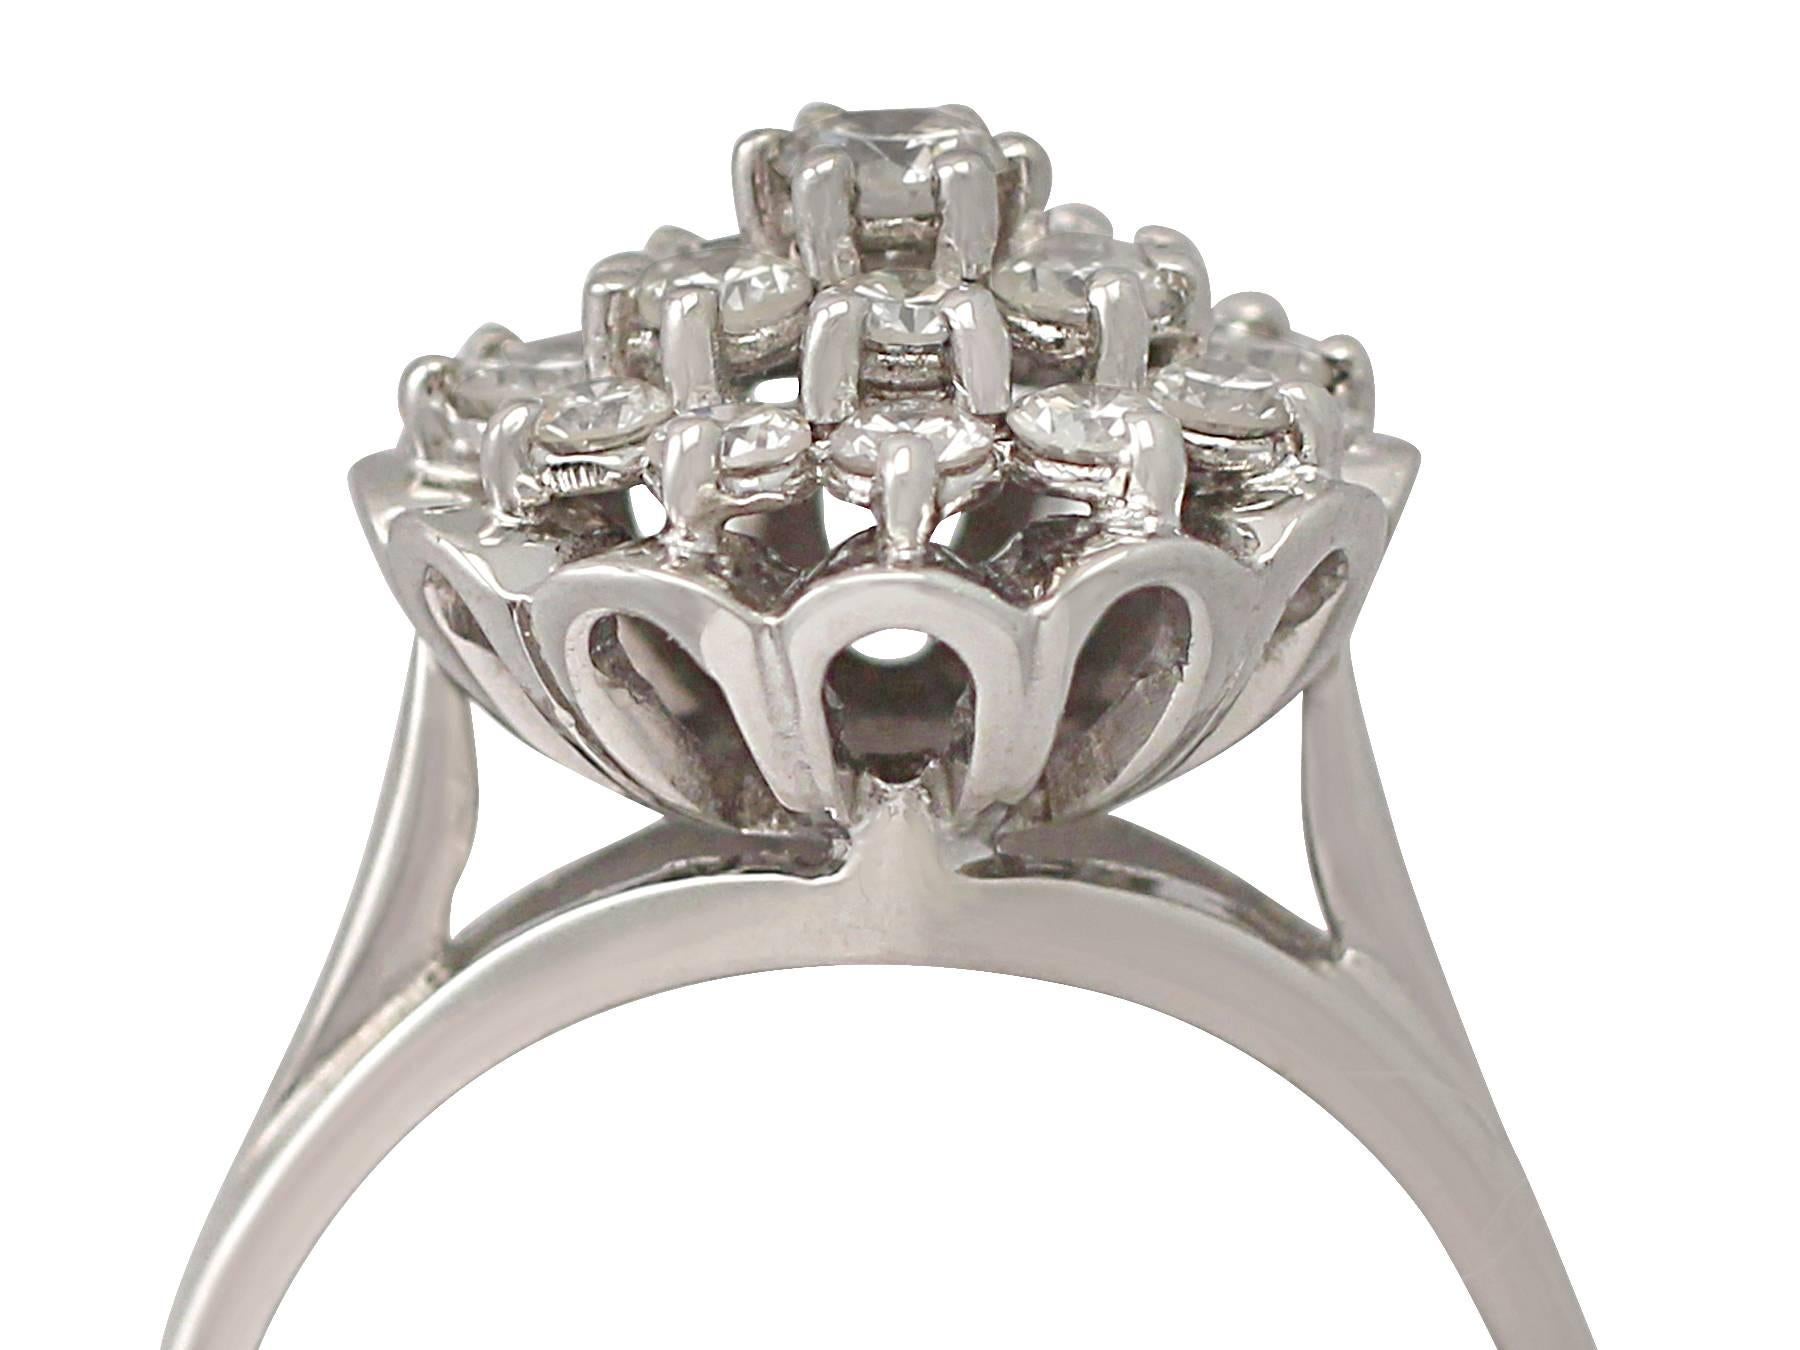 A stunning, fine and impressive vintage 1.63 carat diamond and 18 karat white gold dress ring; part of our vintage jewelry and estate jewelry collections

This stunning, fine and impressive vintage diamond cluster ring has been crafted in 18k